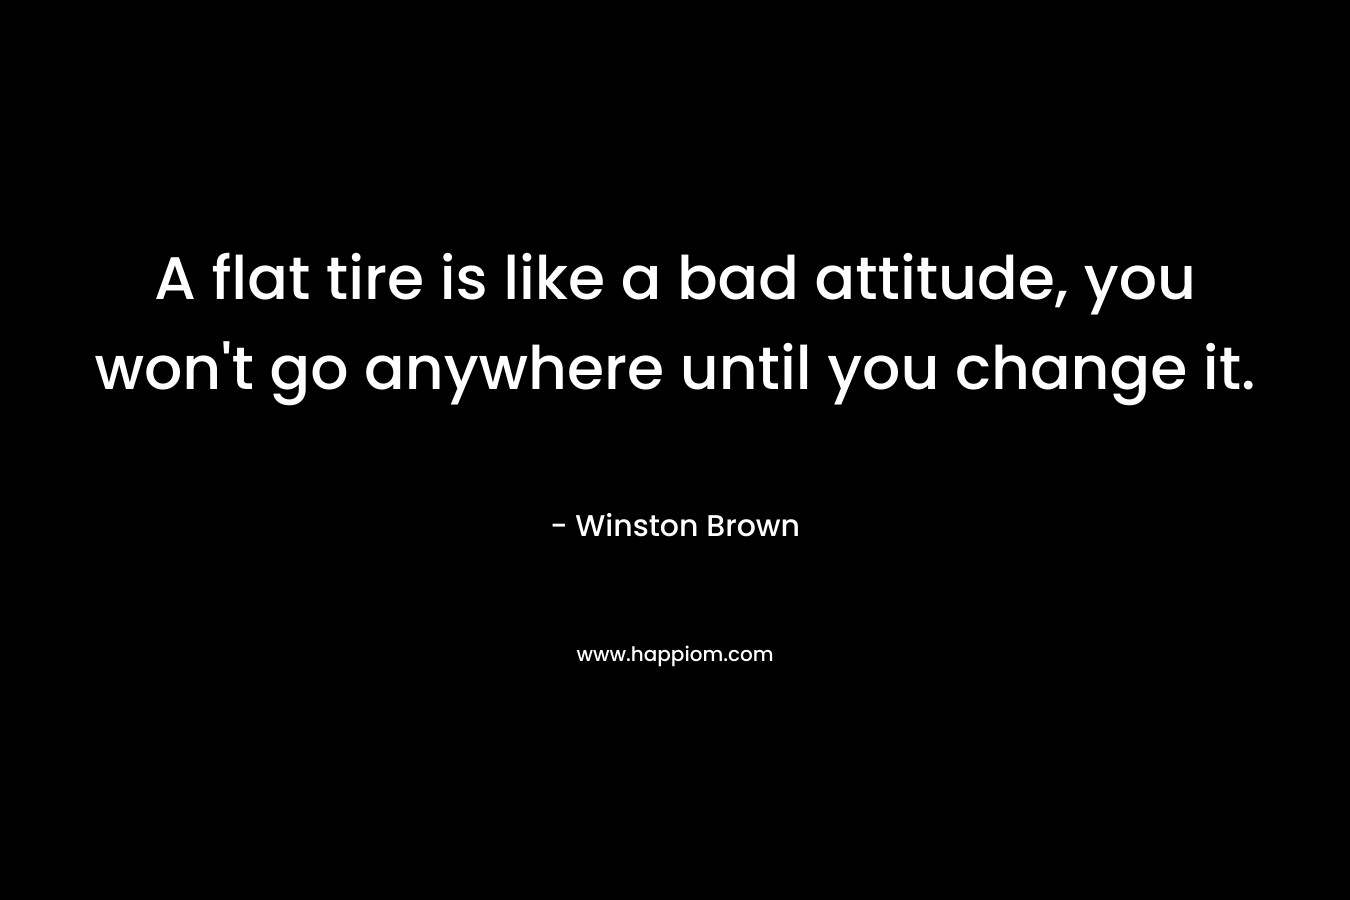 A flat tire is like a bad attitude, you won’t go anywhere until you change it. – Winston Brown